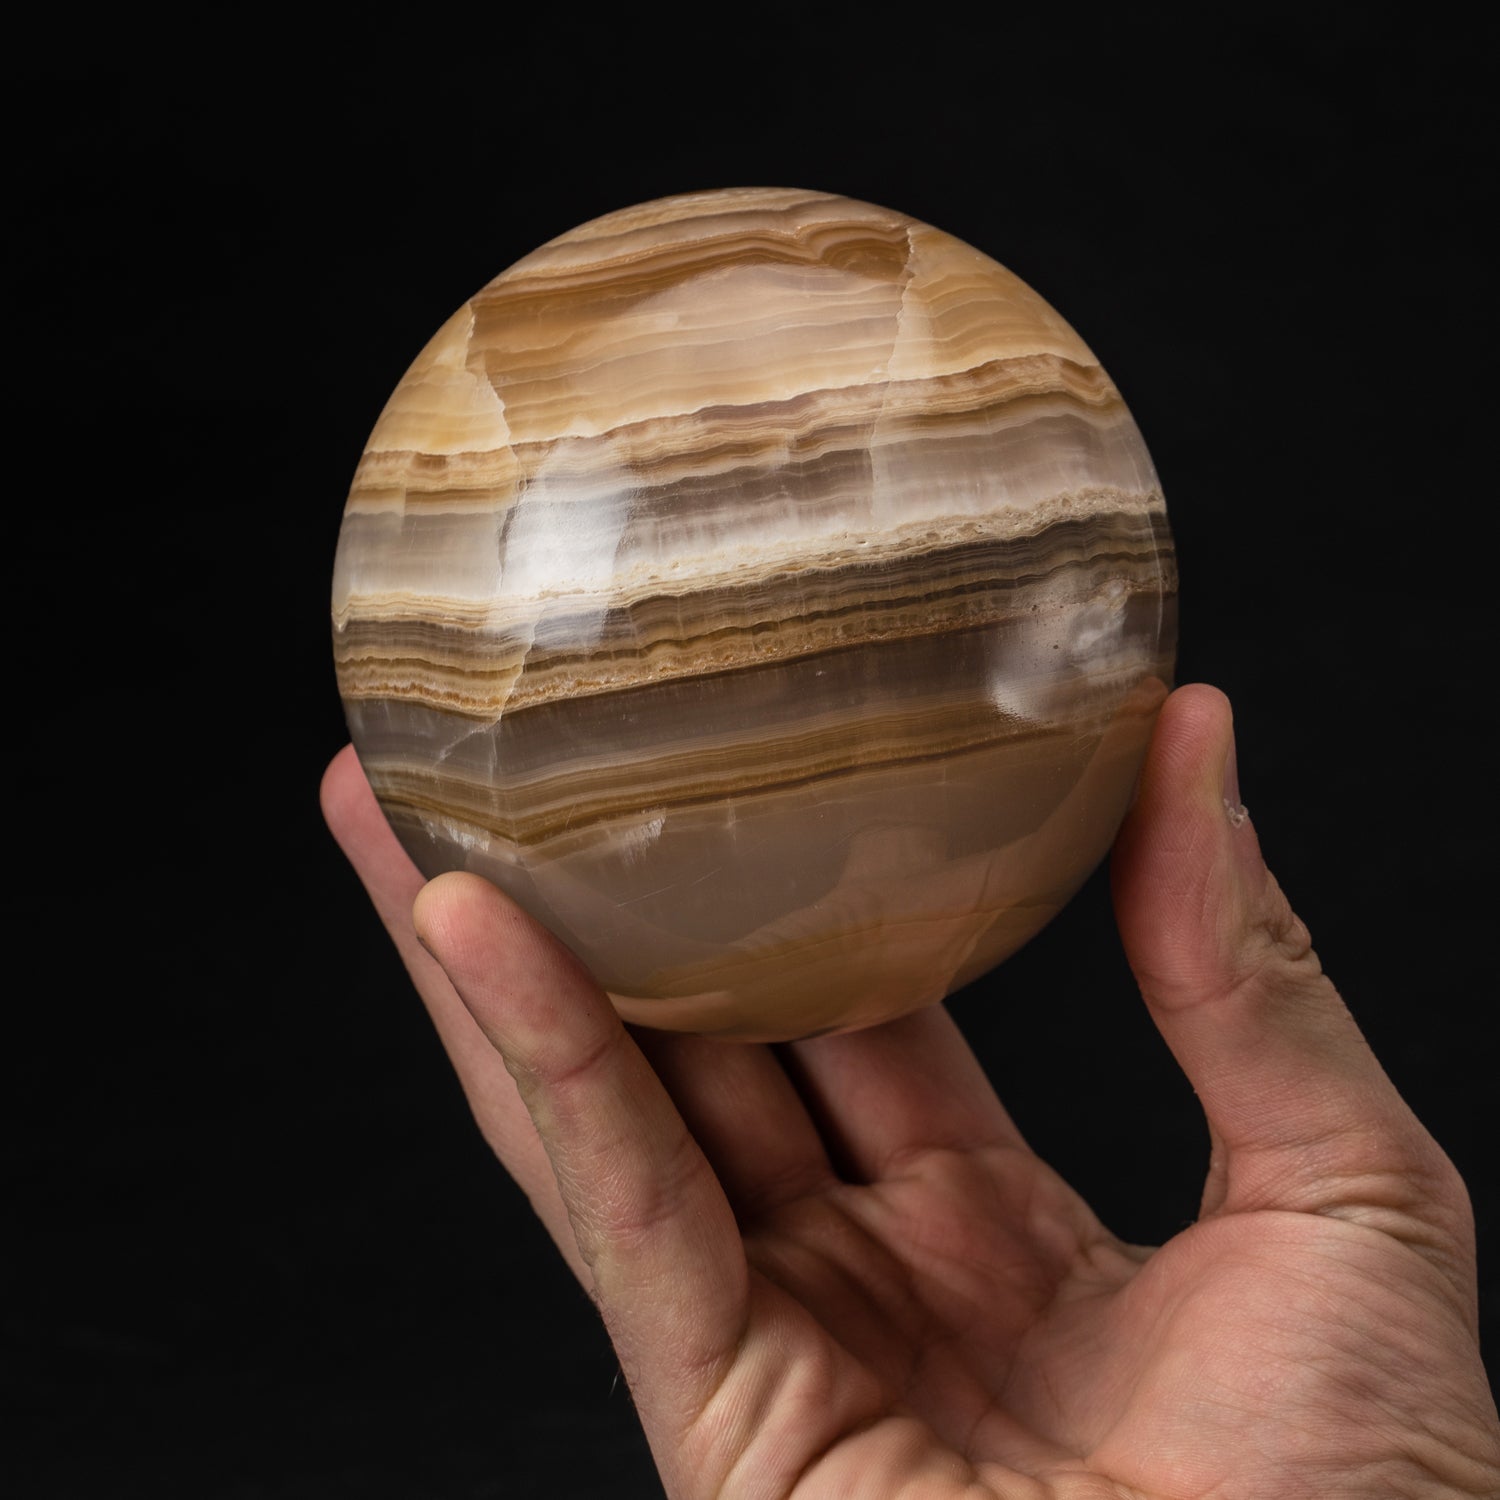 Polished Natural Banded Onyx Sphere from Mexico (1.8 lbs)